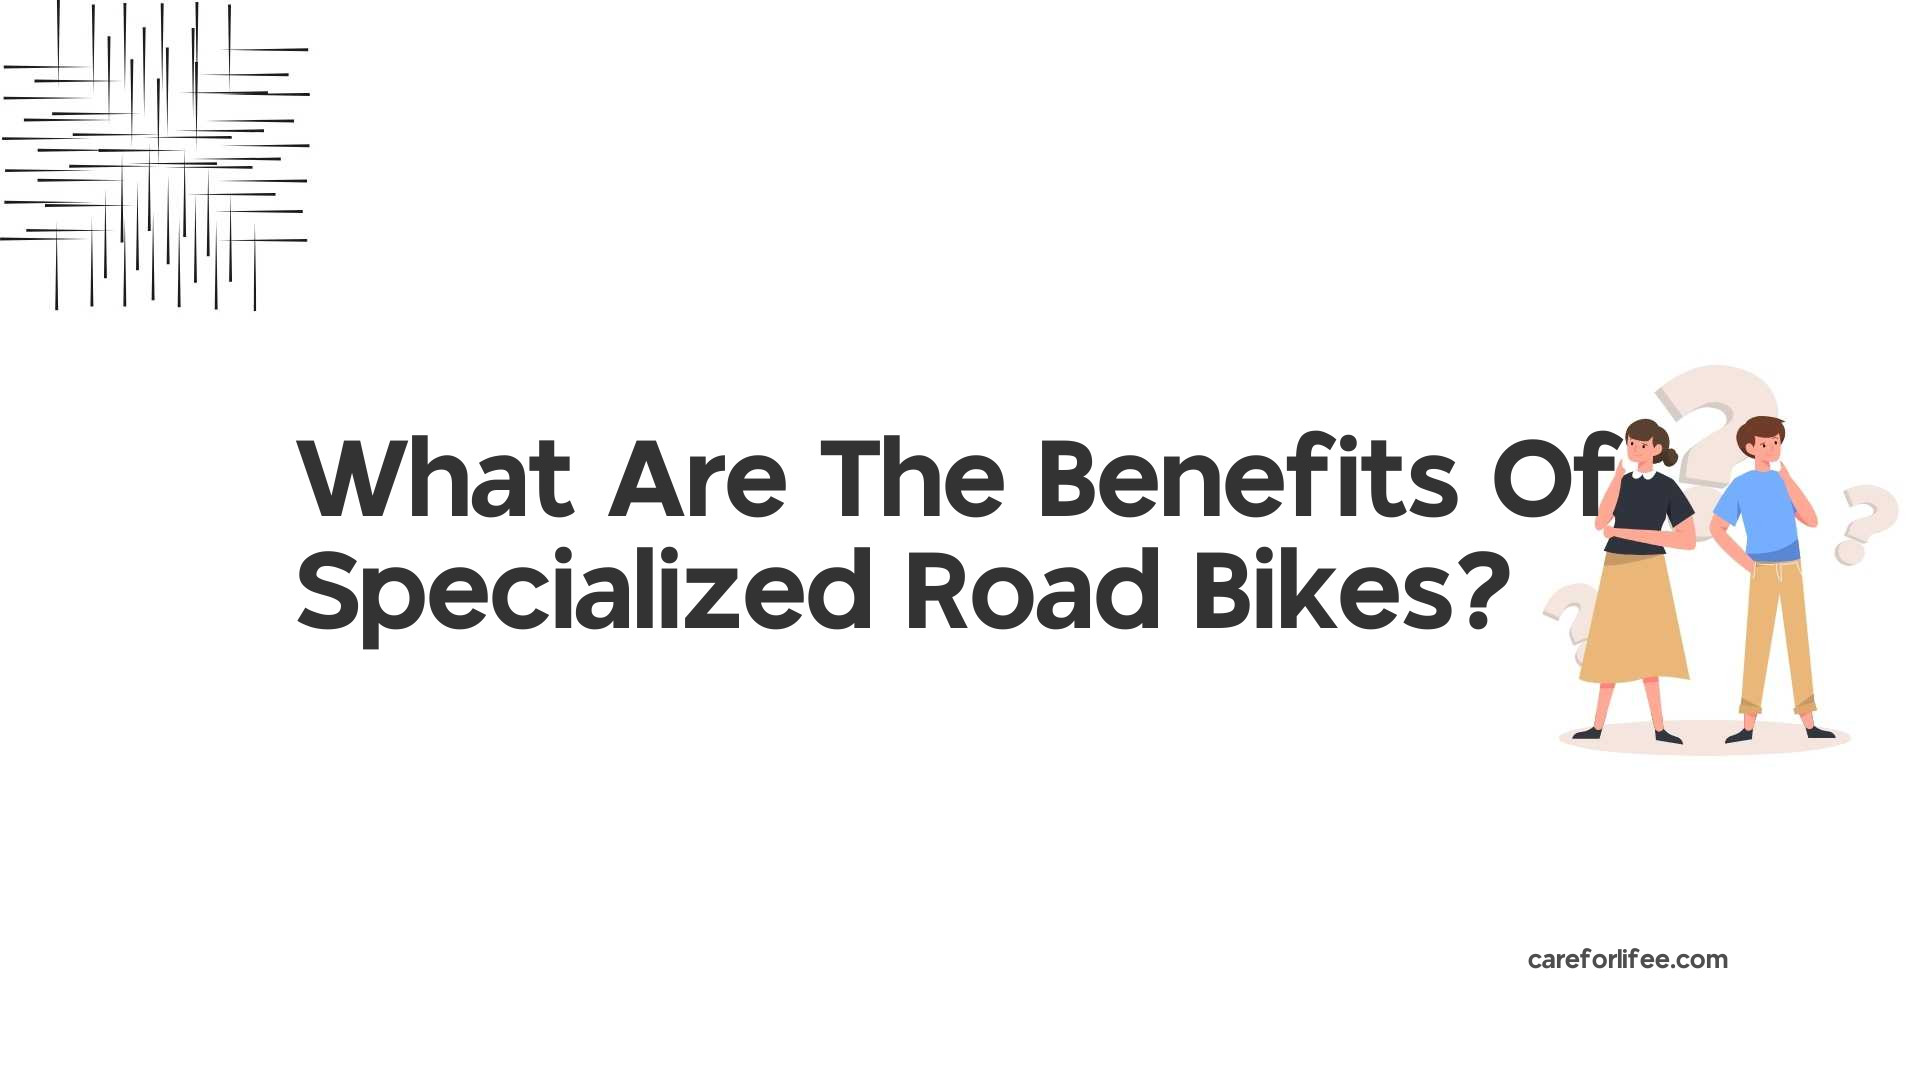 What Are The Benefits Of Specialized Road Bikes?